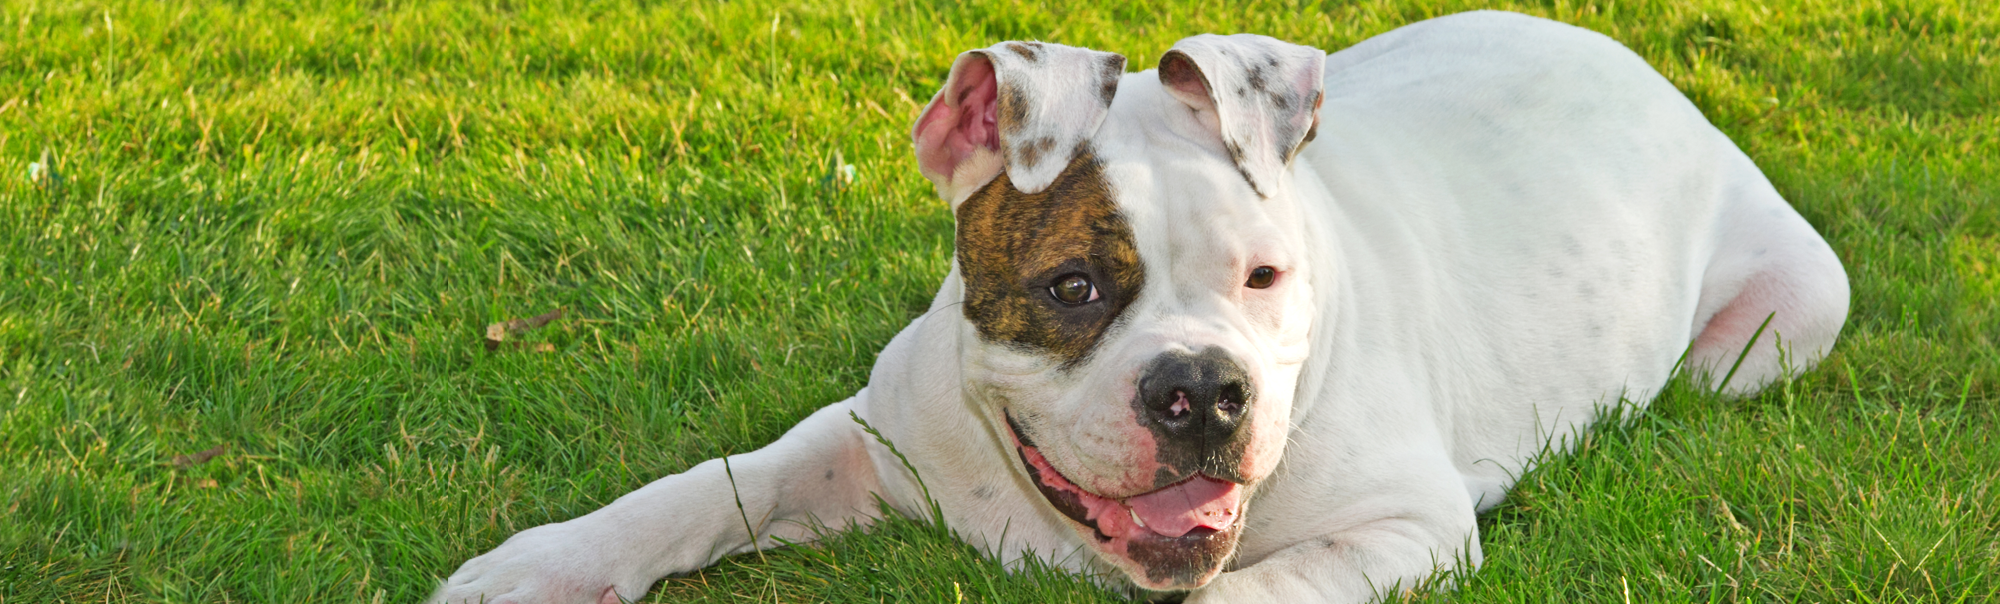 White and Brown Dog Laying in grass